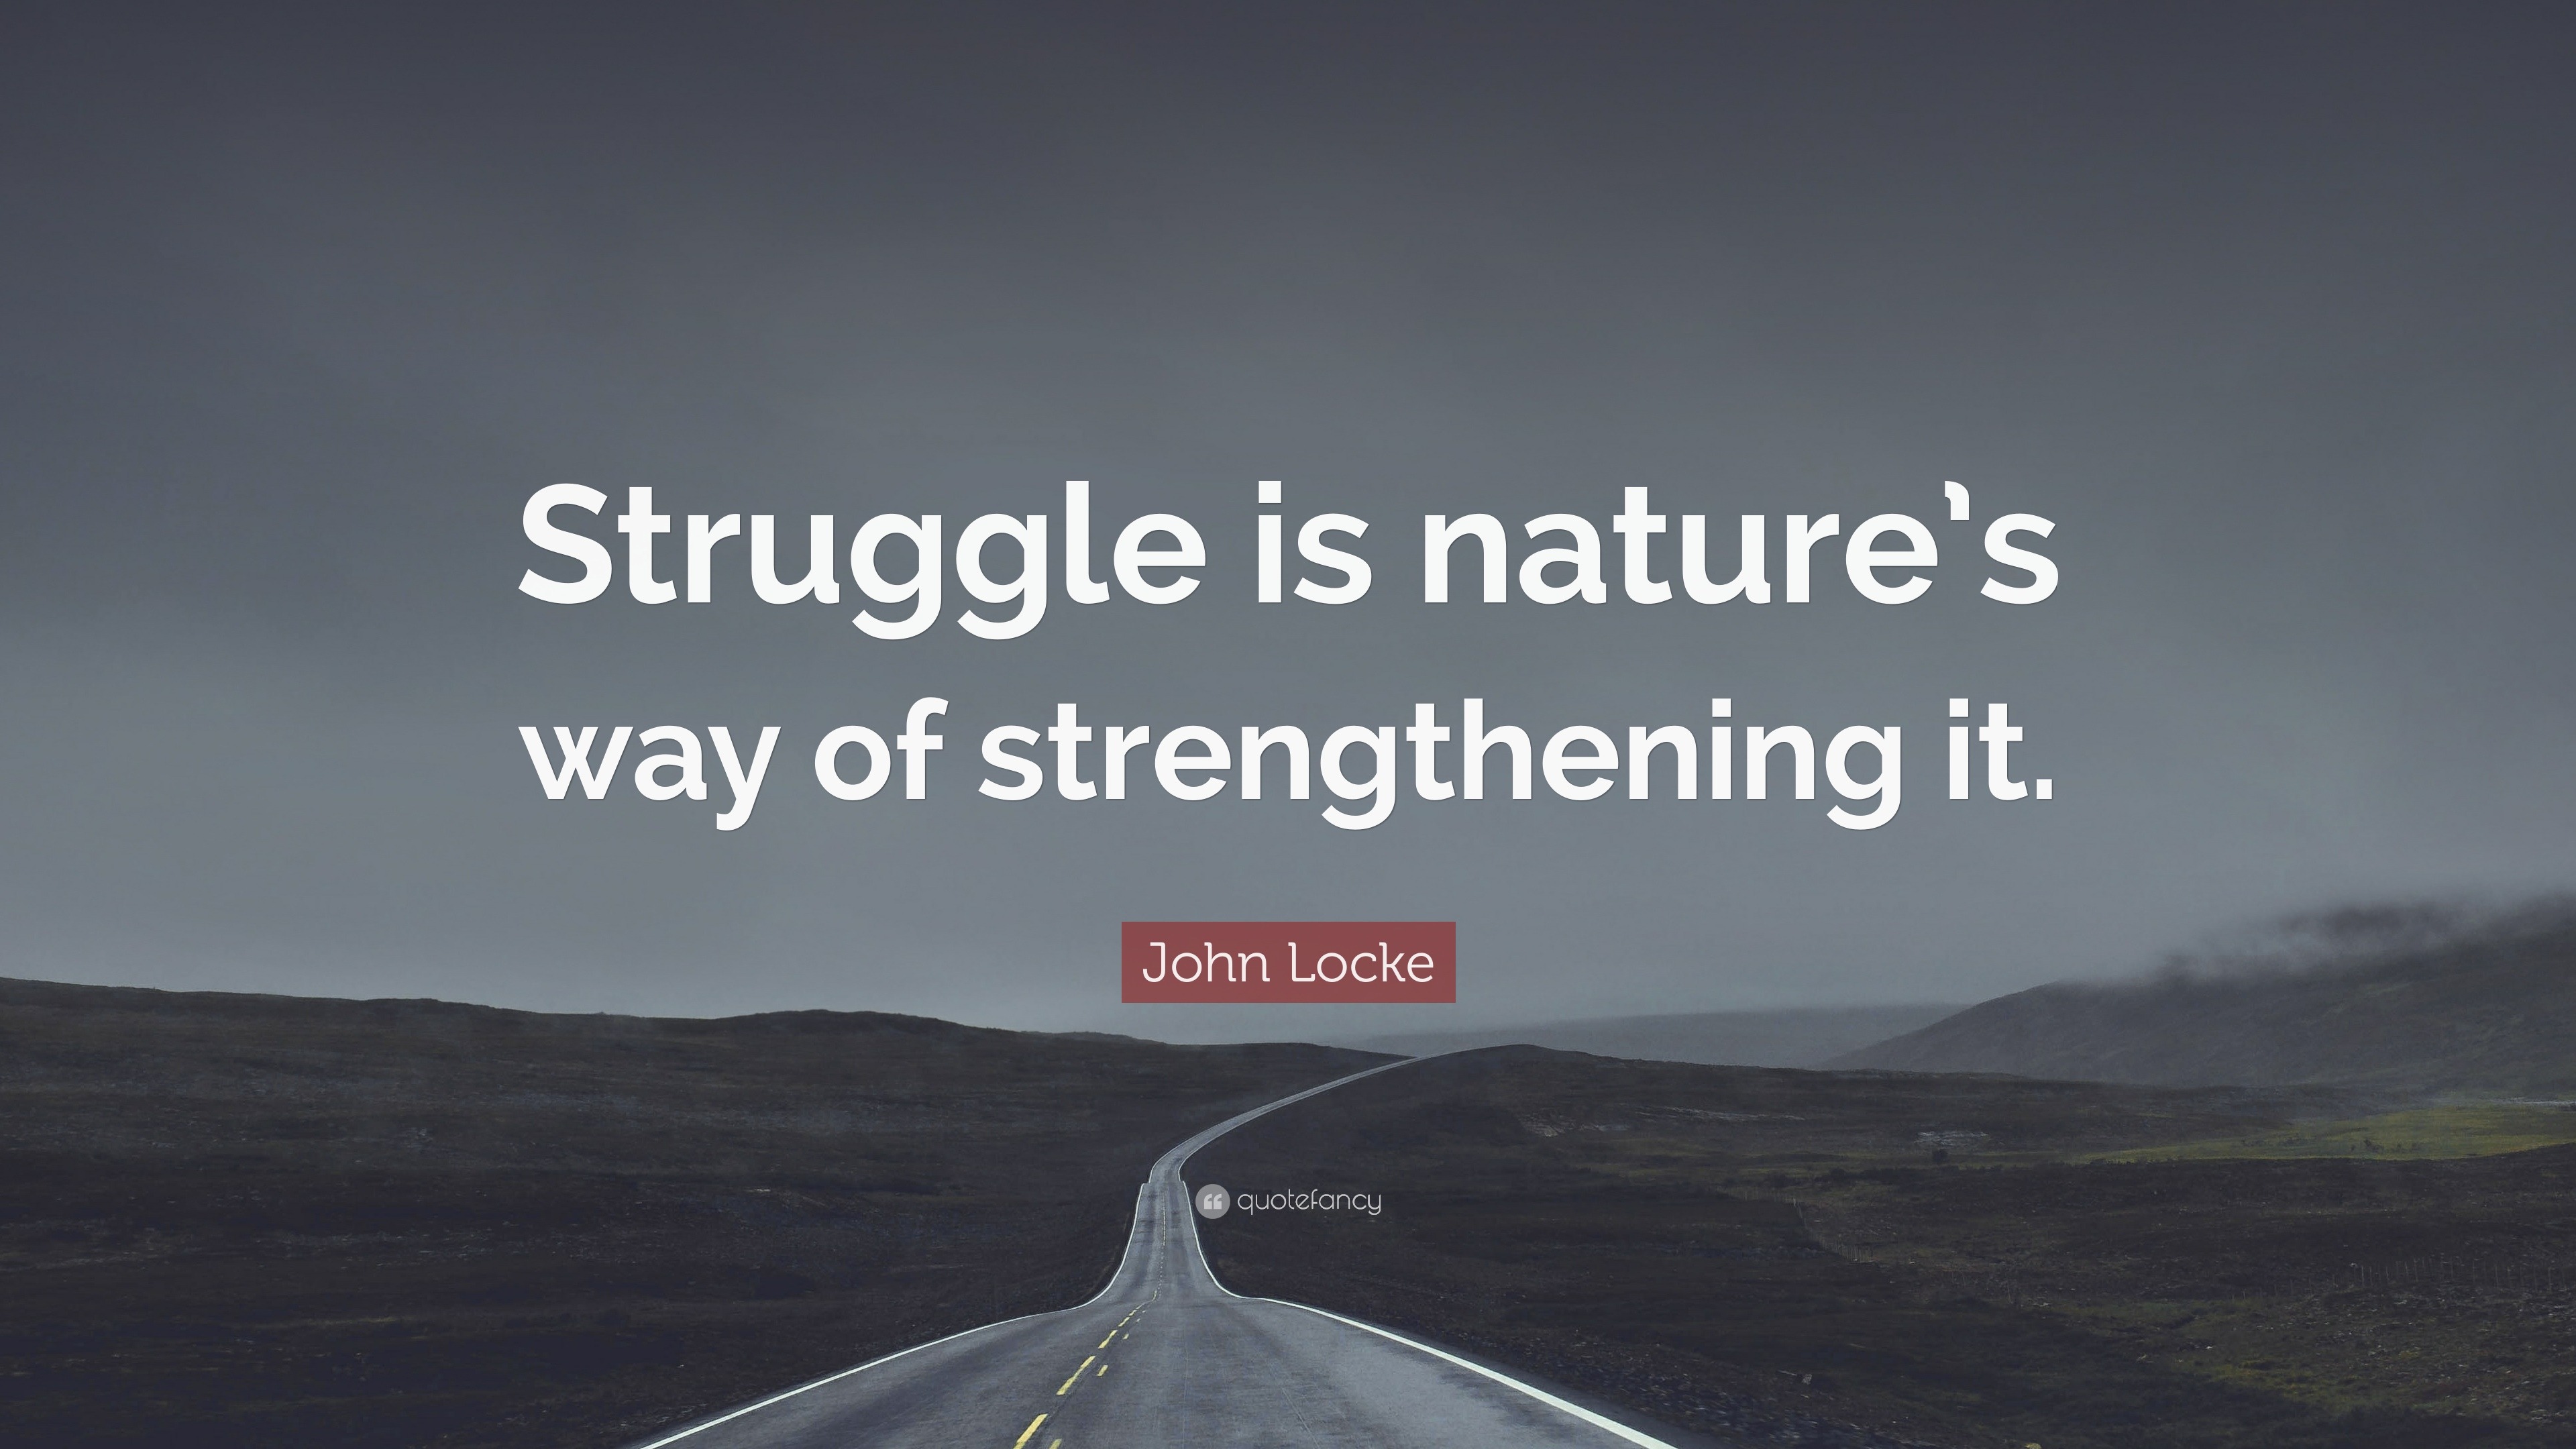 17 Confucius Quotes and Analects on Life Success and Struggle